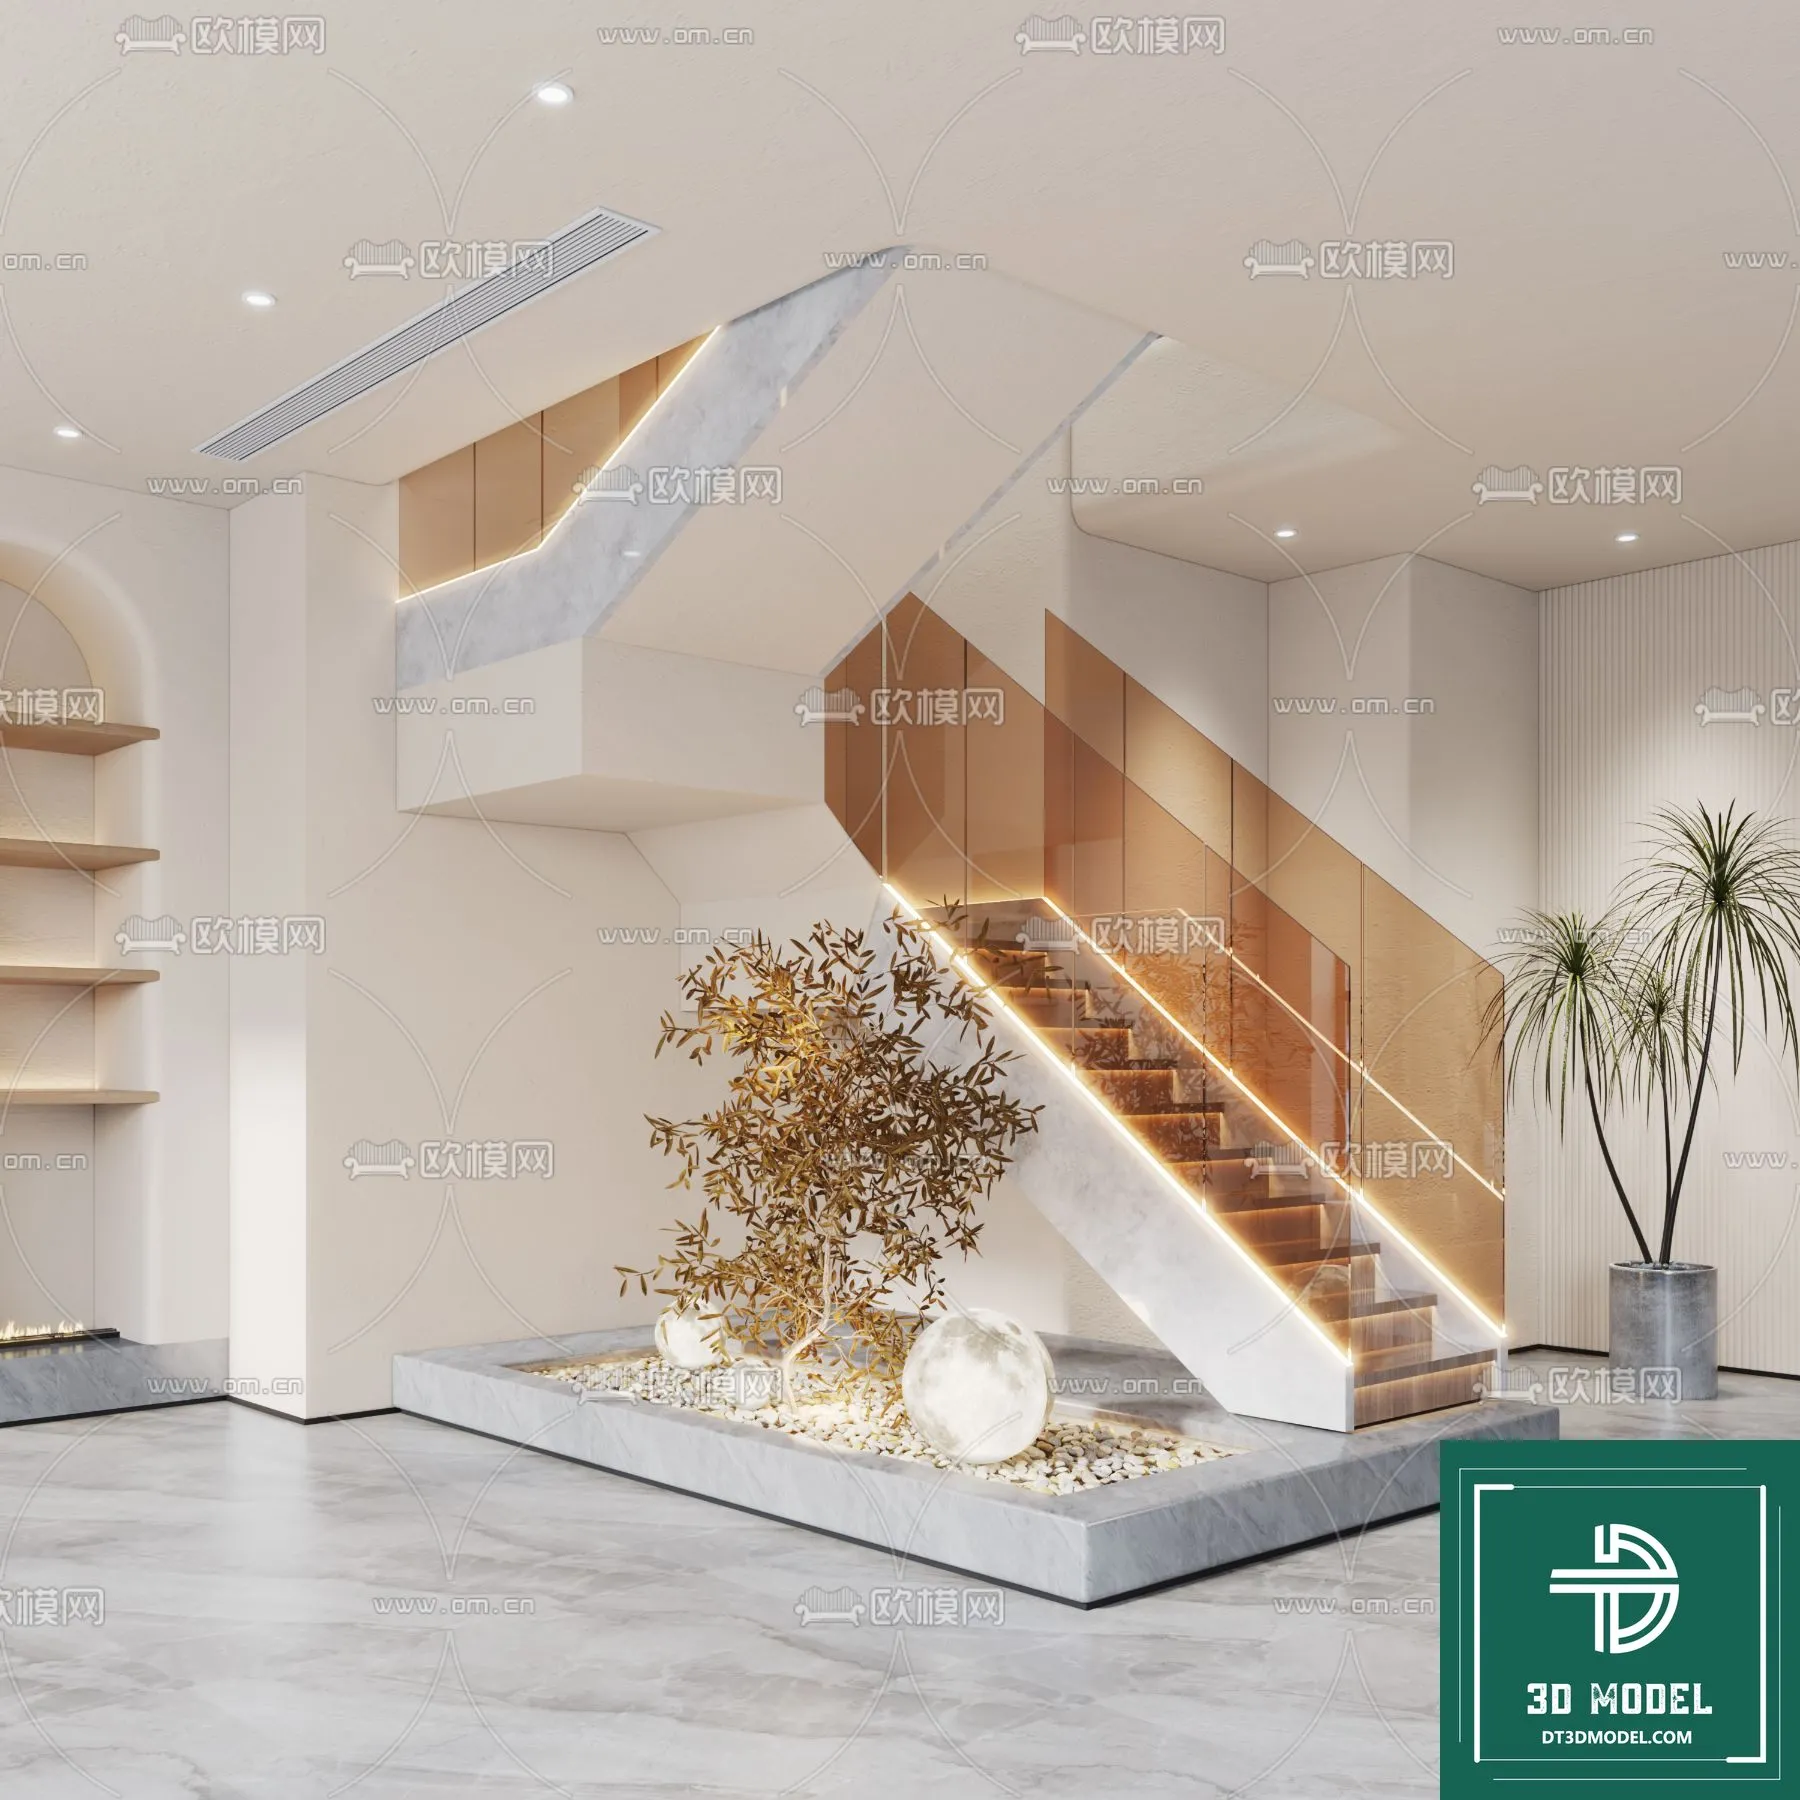 STAIR – 3DS MAX MODELS – 034 – PRO